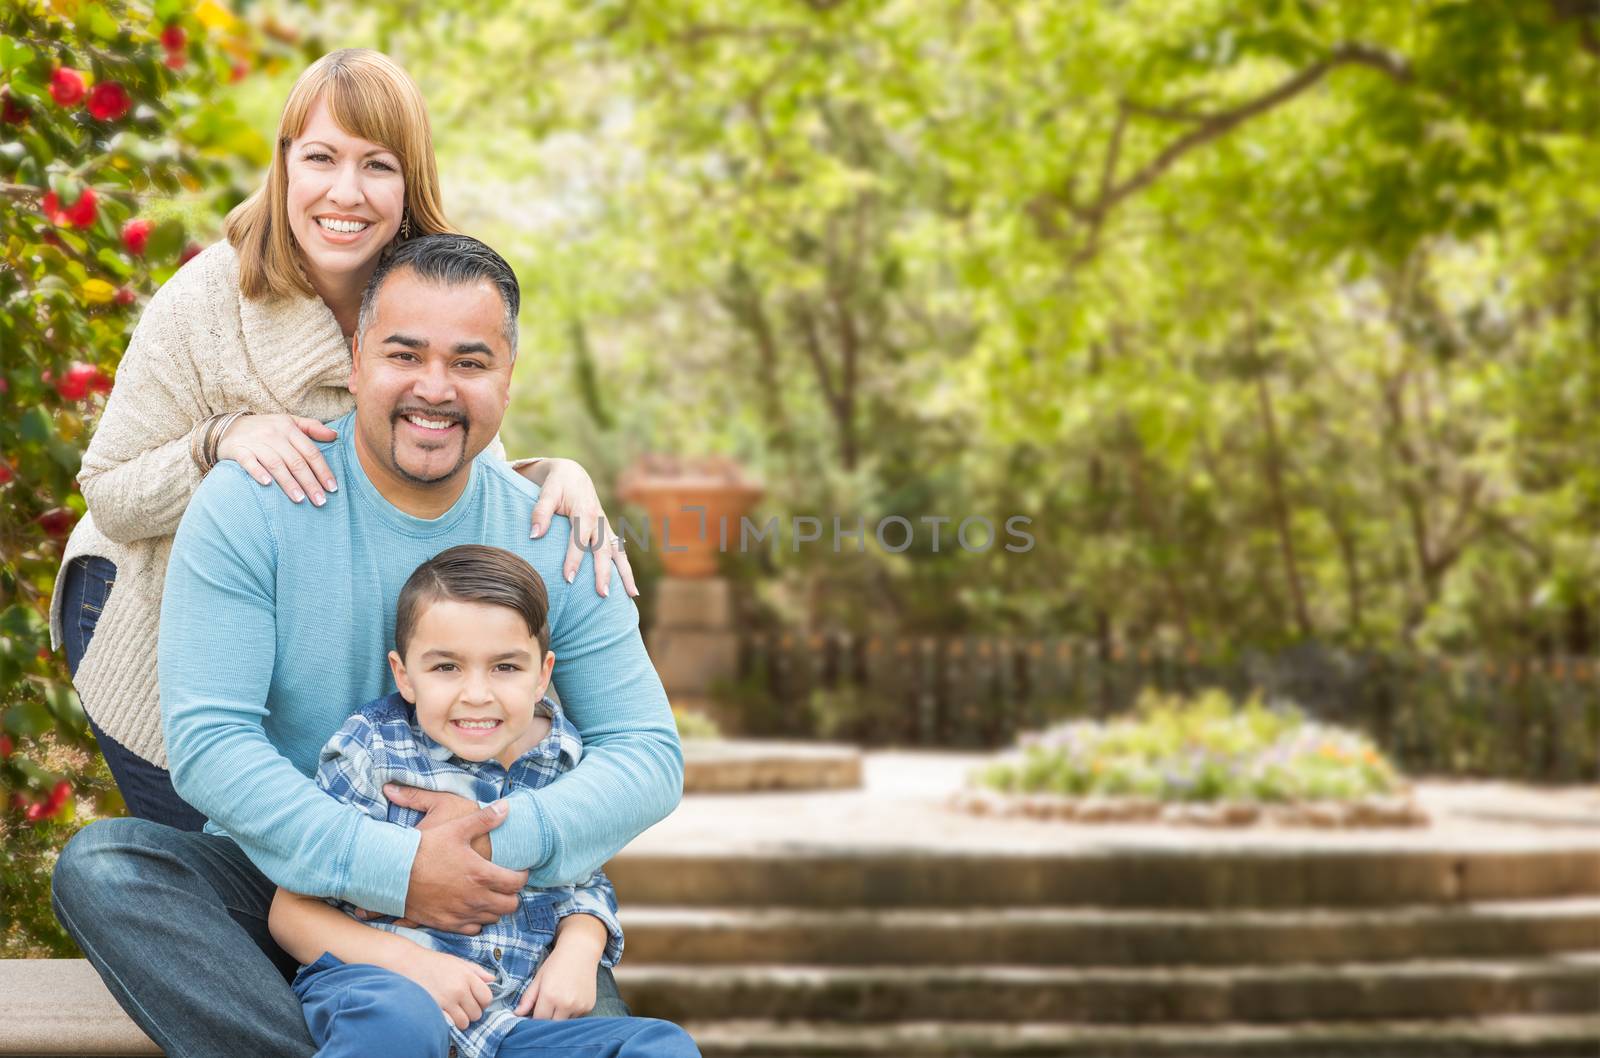 Mixed Race Hispanic and Caucasian Family Portrait at the Park by Feverpitched